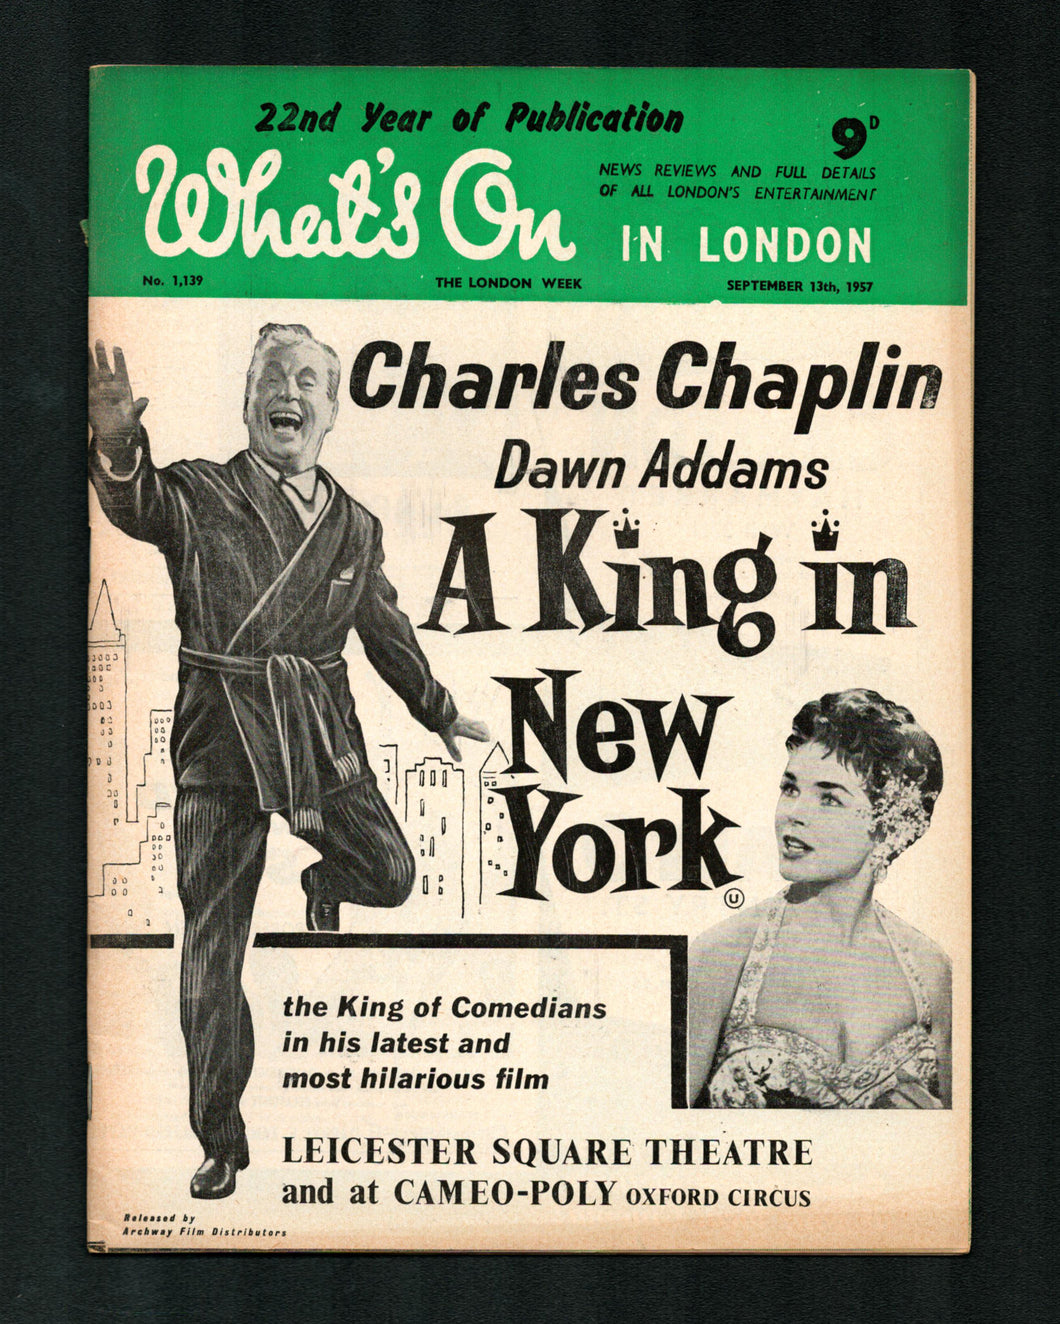 Whats on in London No 1139 Sept 13 1957